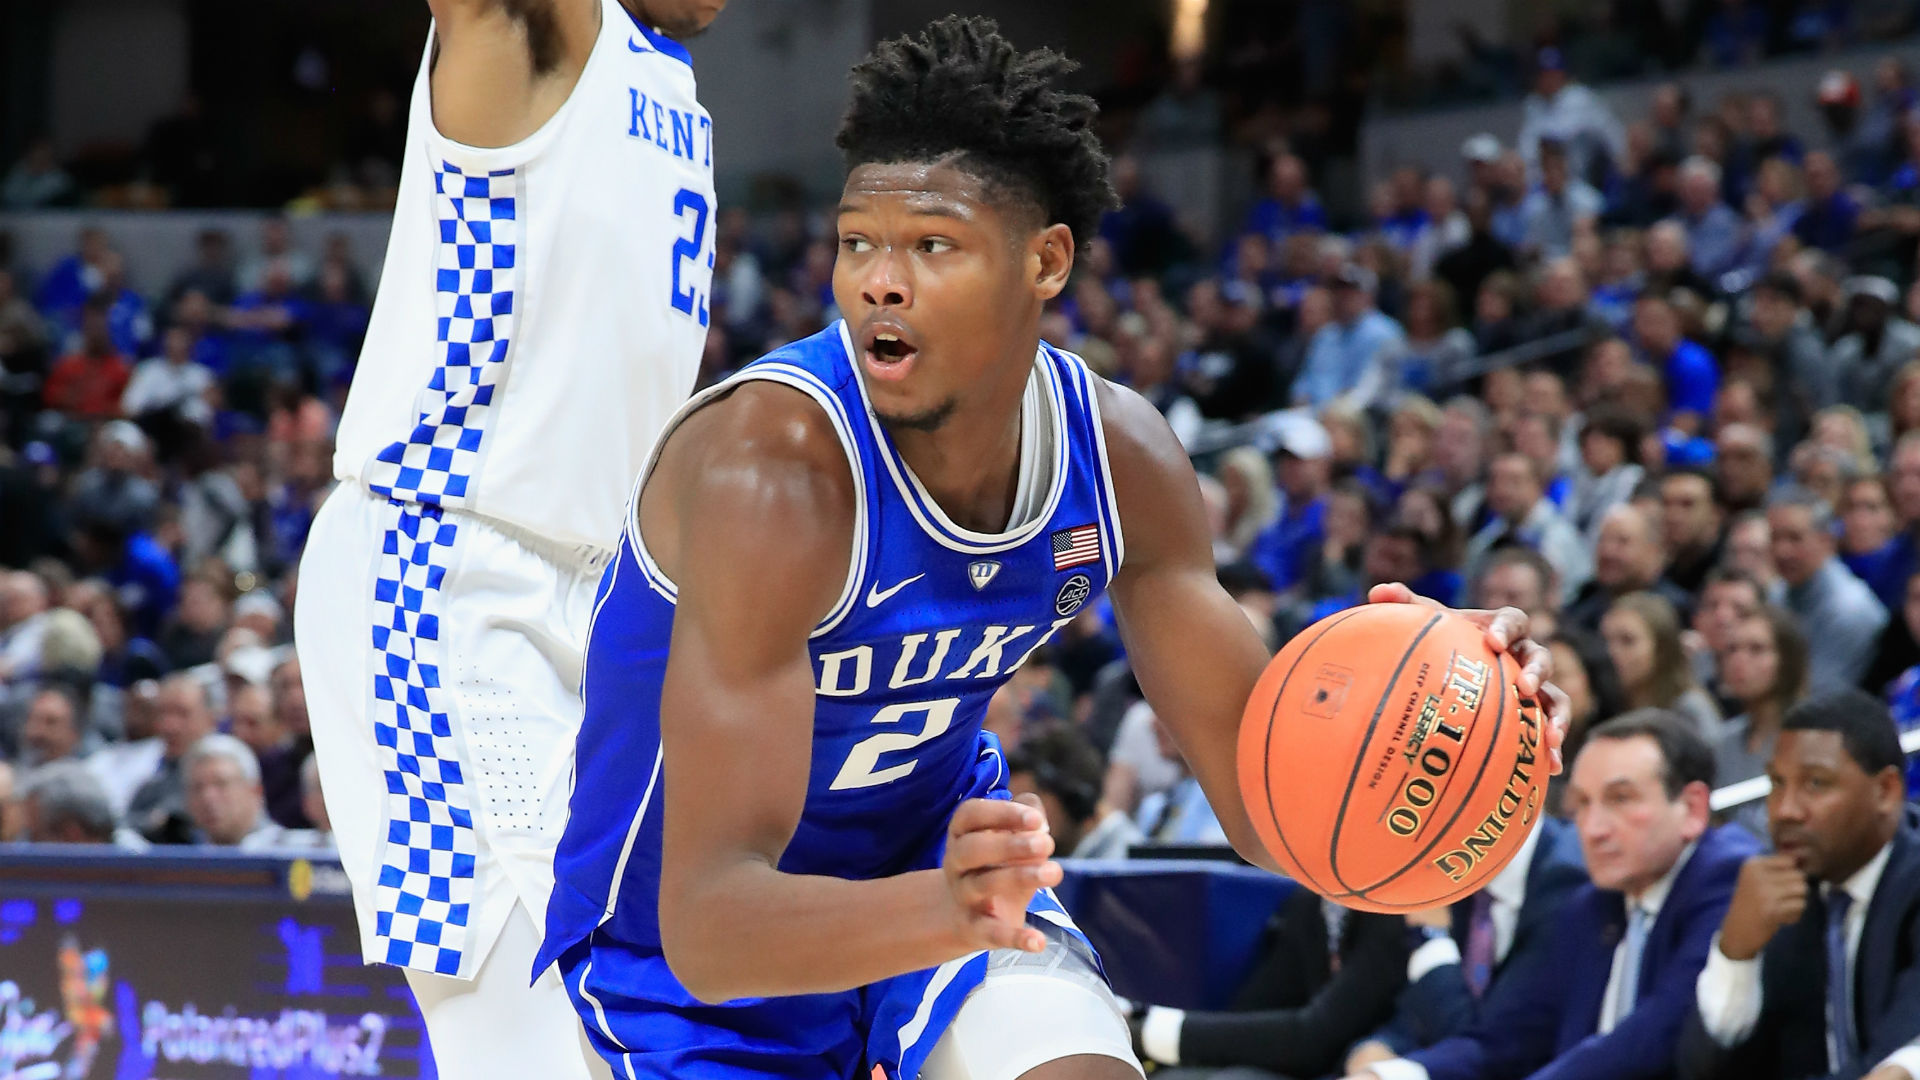 NBA Draft 2019: Cam Reddish scouting report, strengths, weaknesses and player ...1920 x 1080